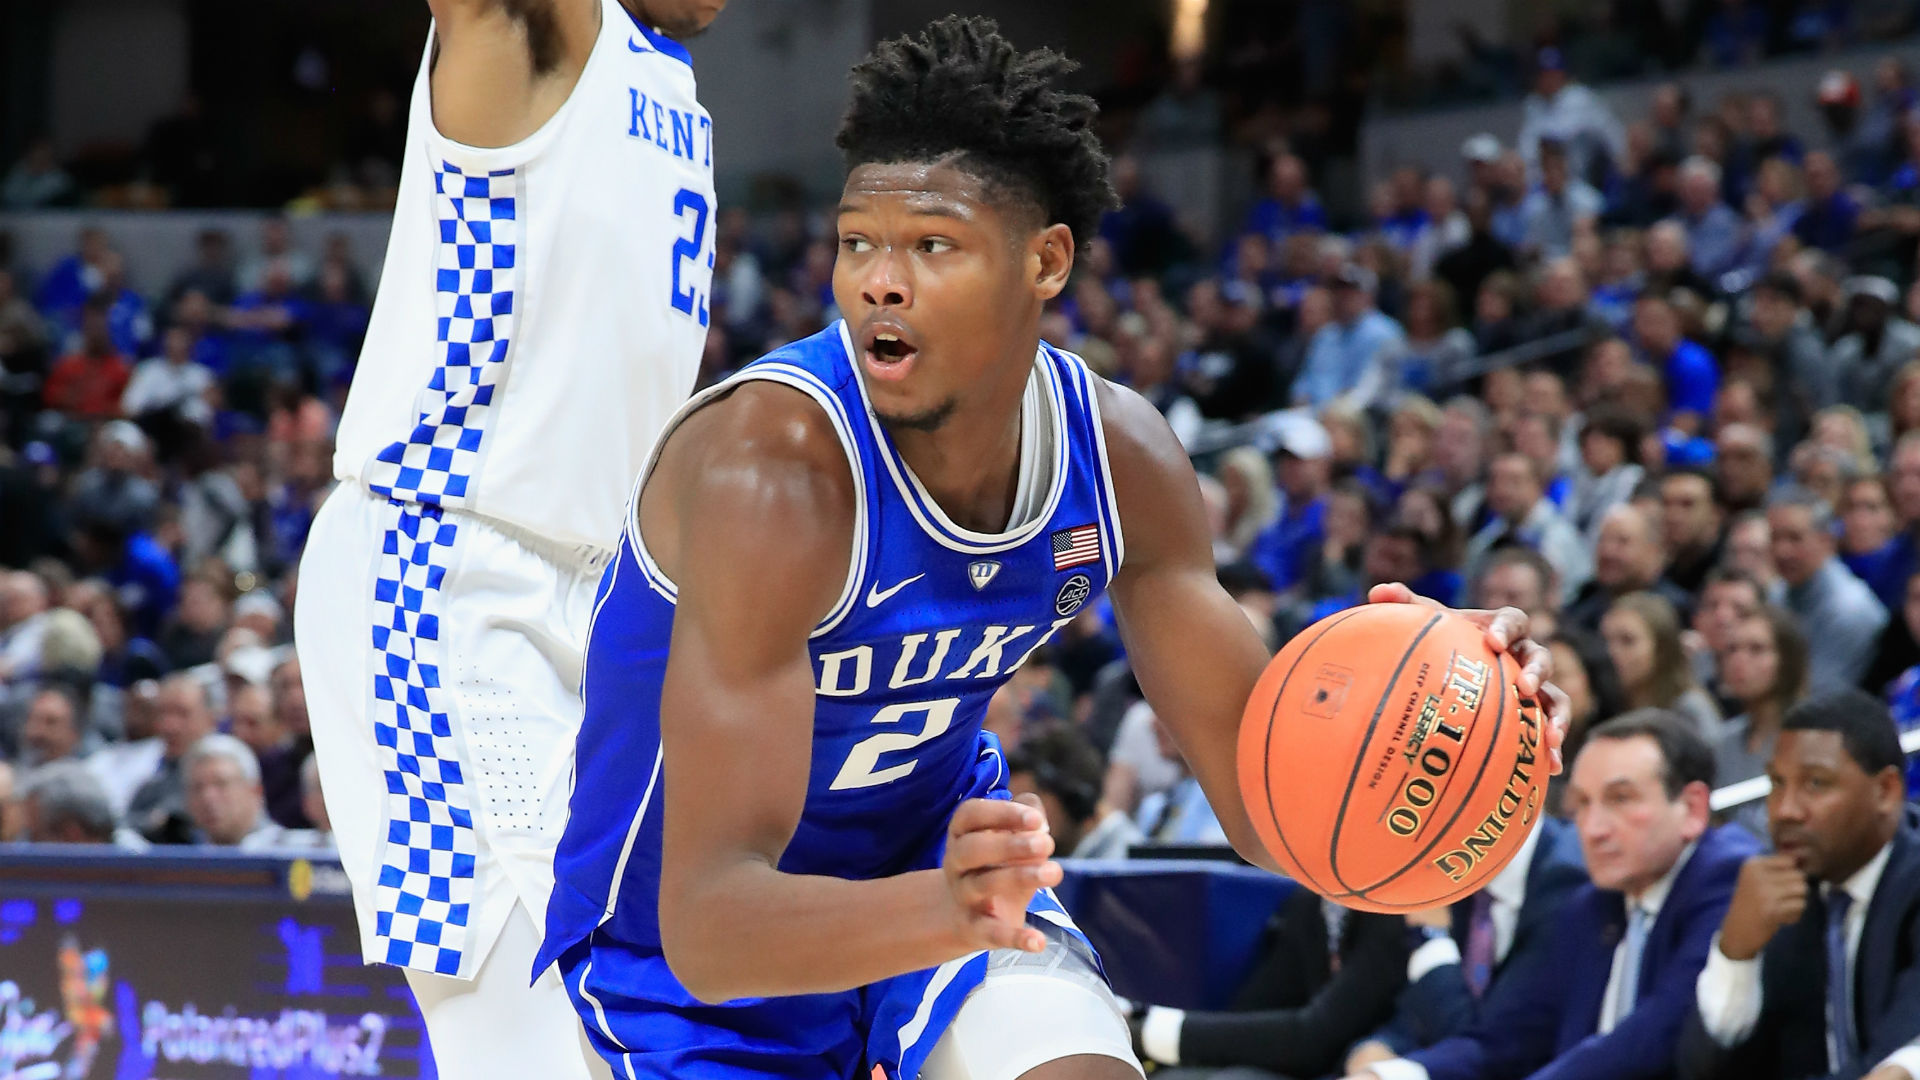 NBA Draft 2019: Cam Reddish scouting report, strengths, weaknesses and player ...1920 x 1080